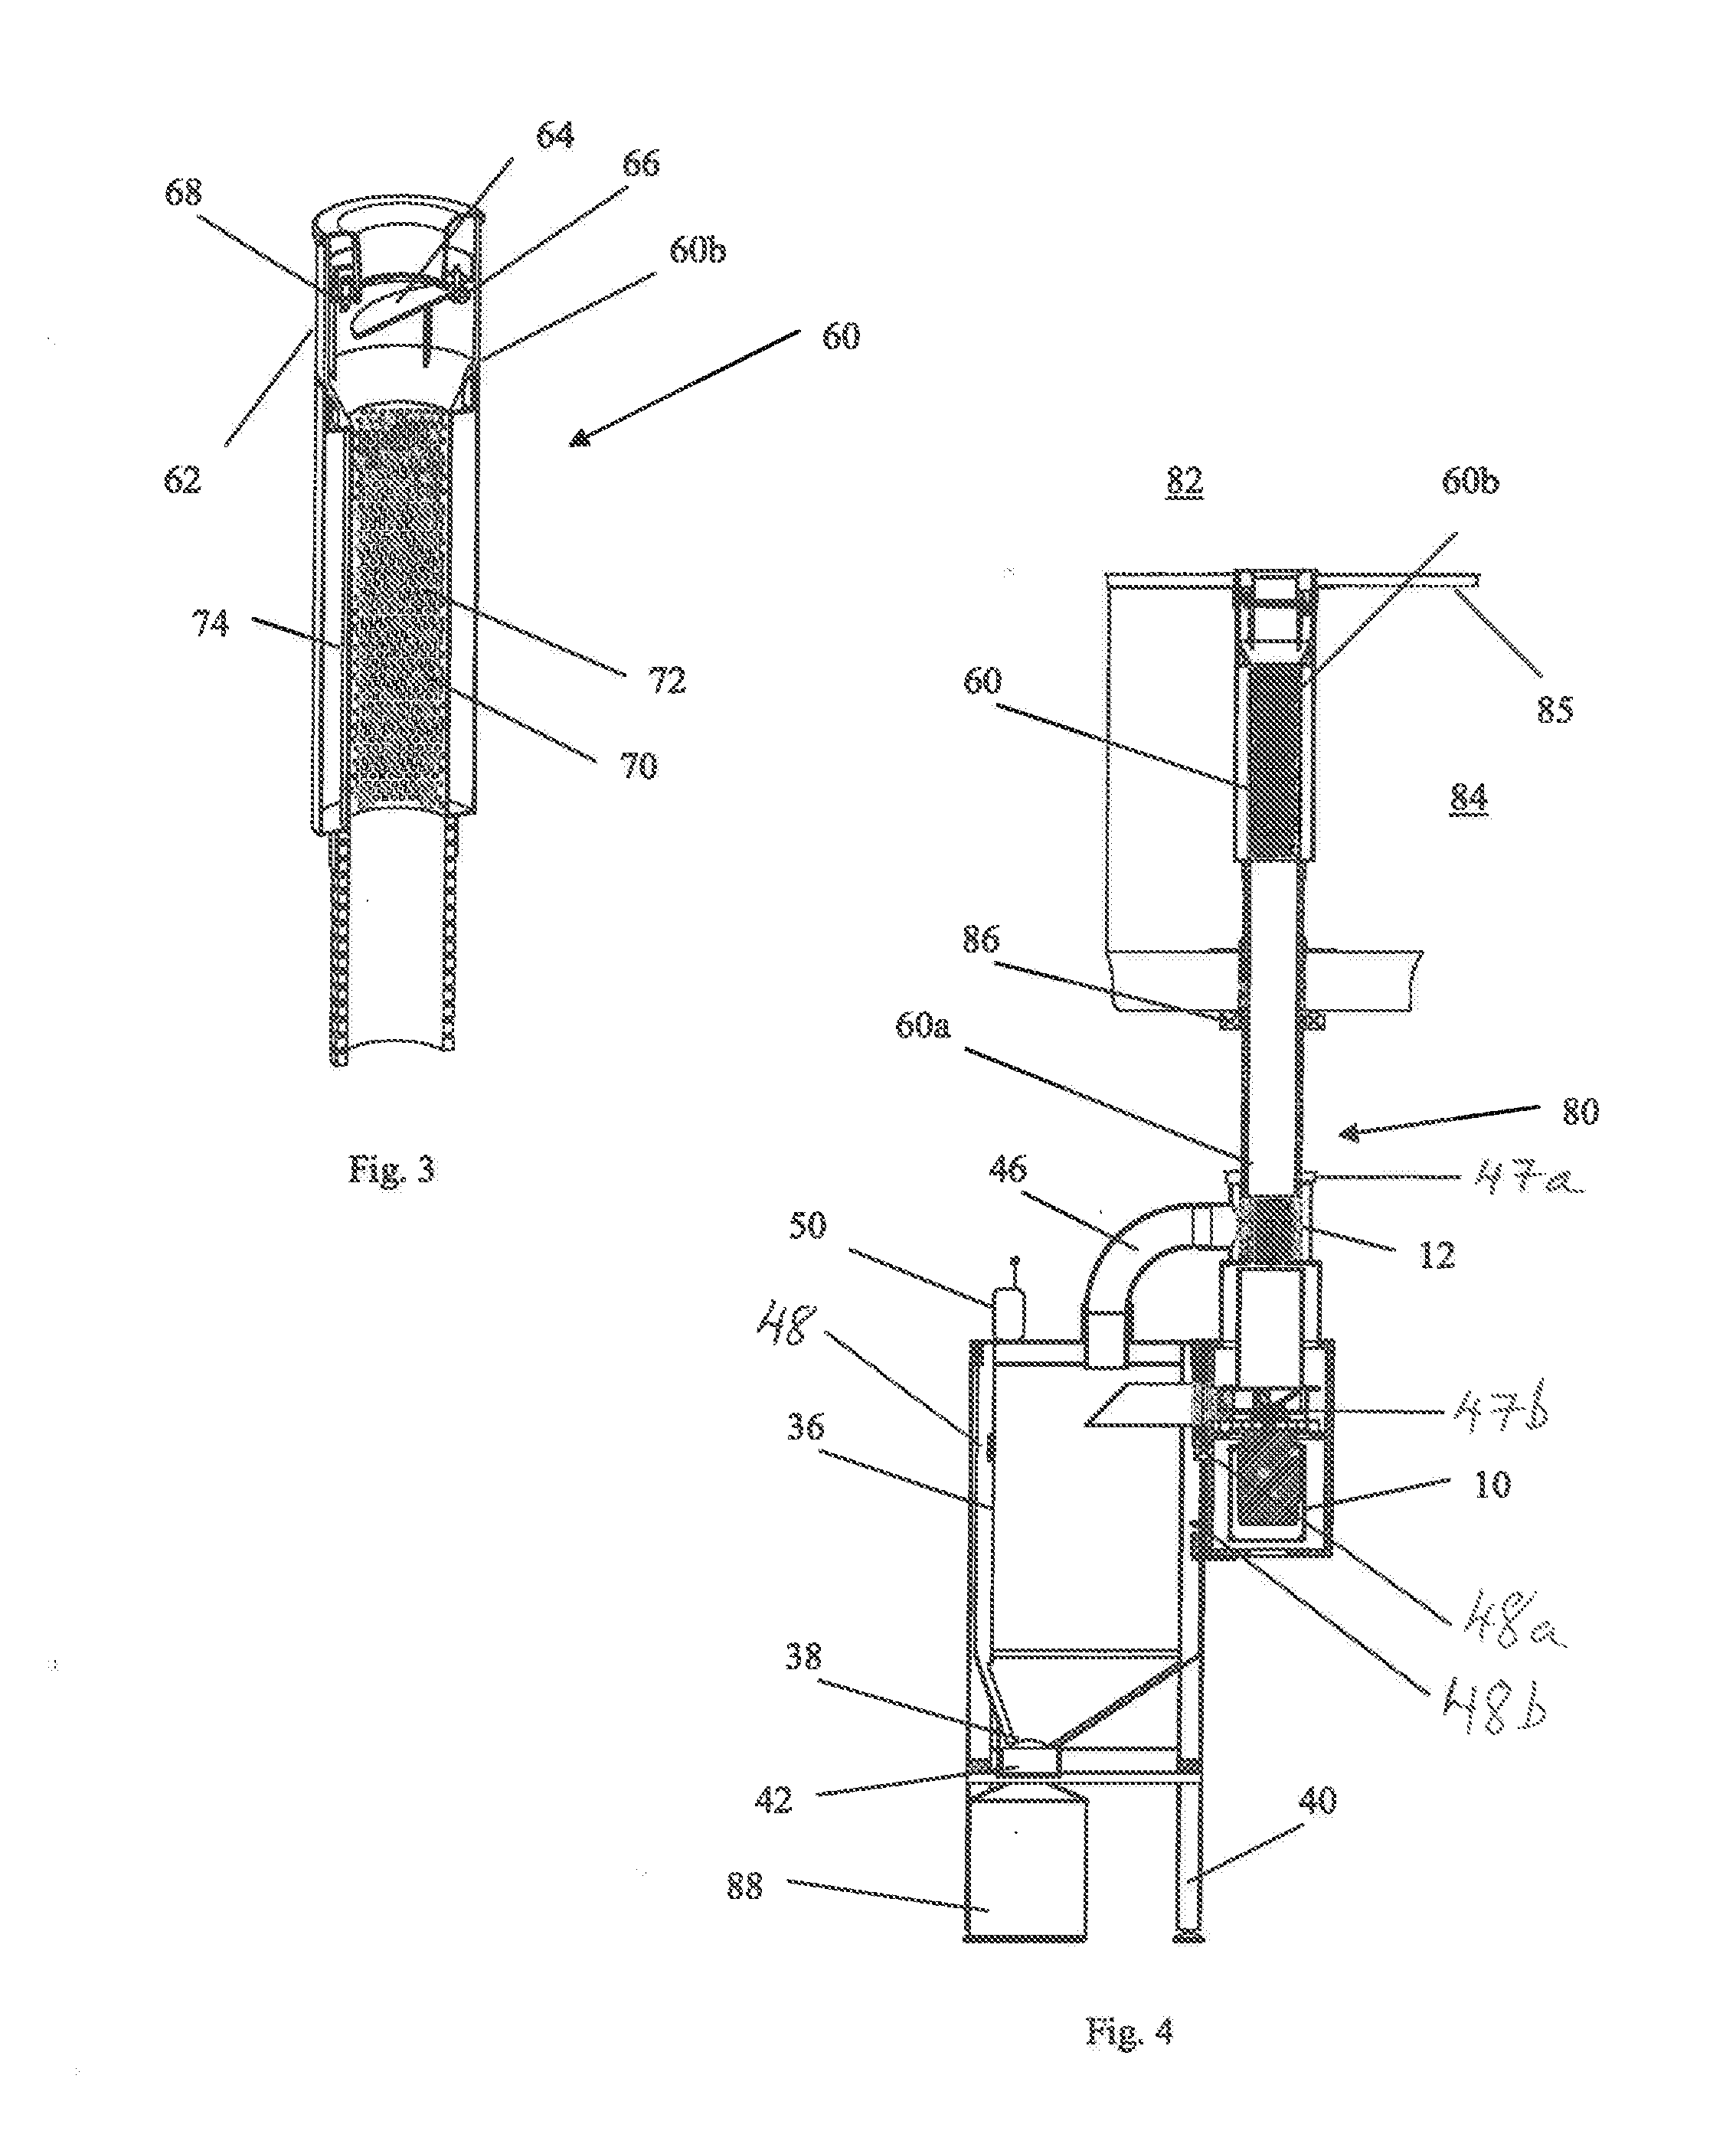 Device for breaking glass